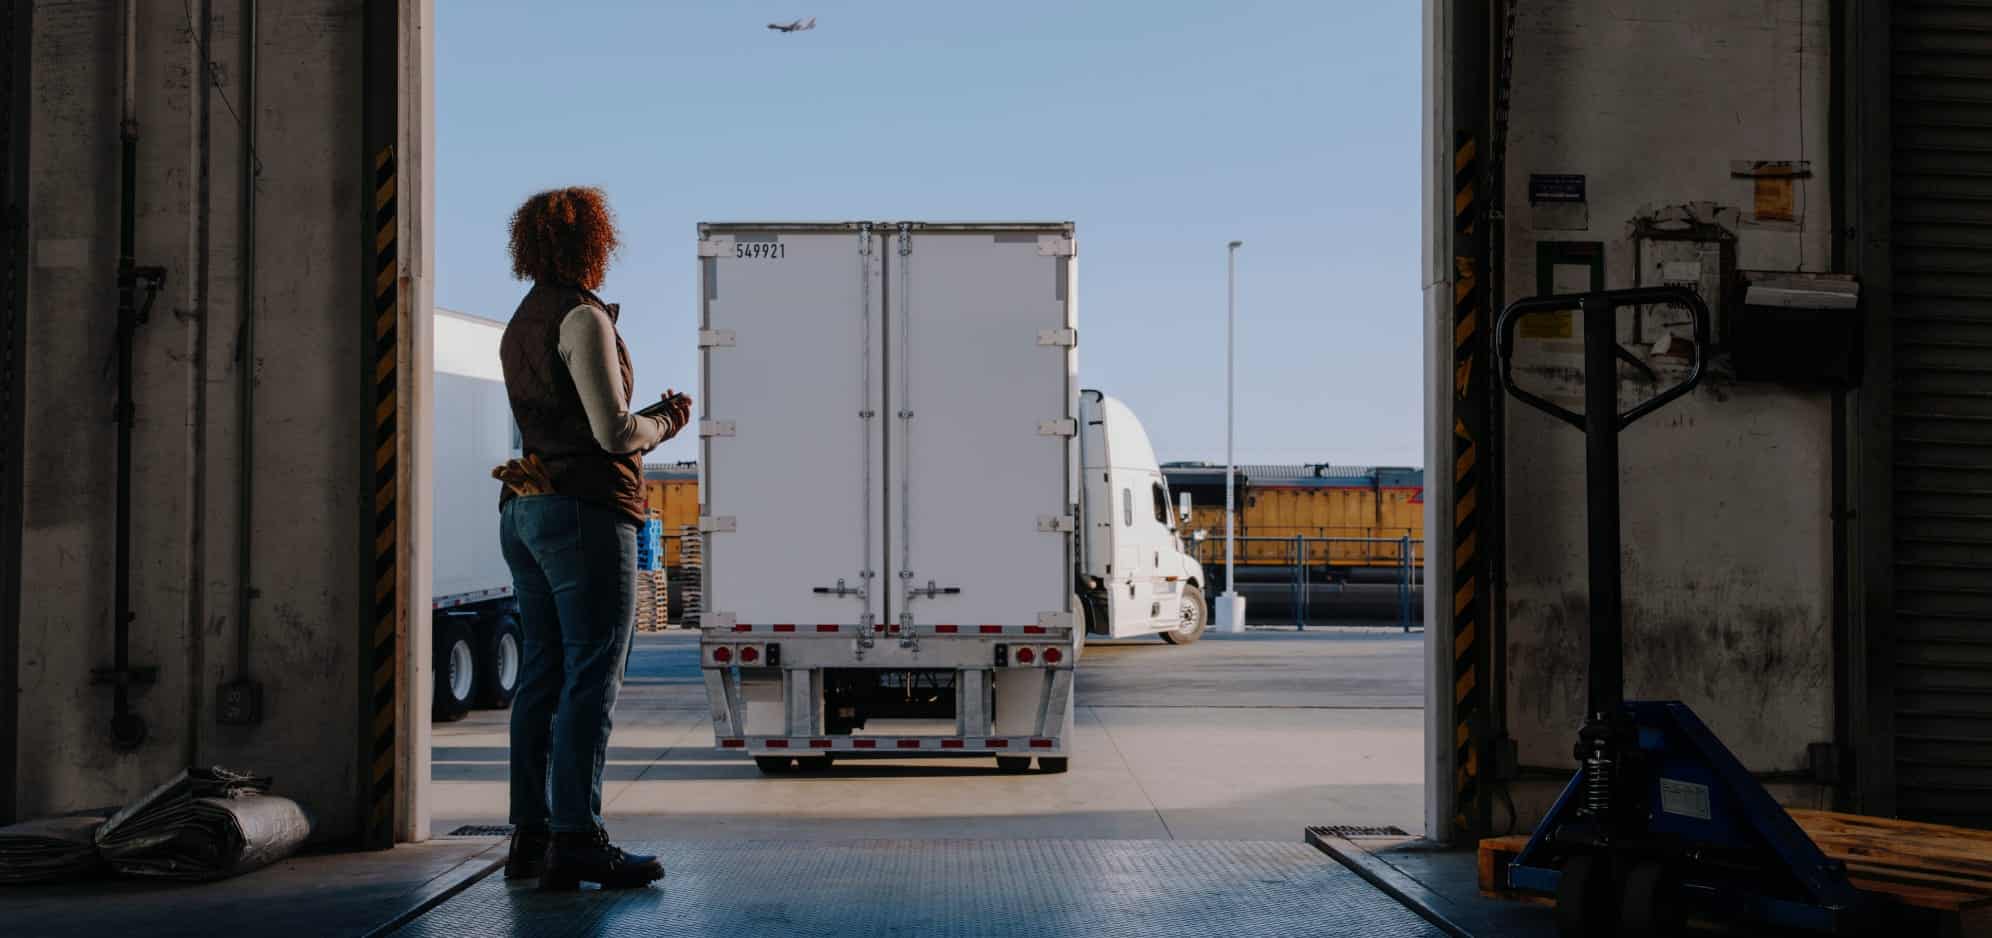 woman watching truck from loading dock